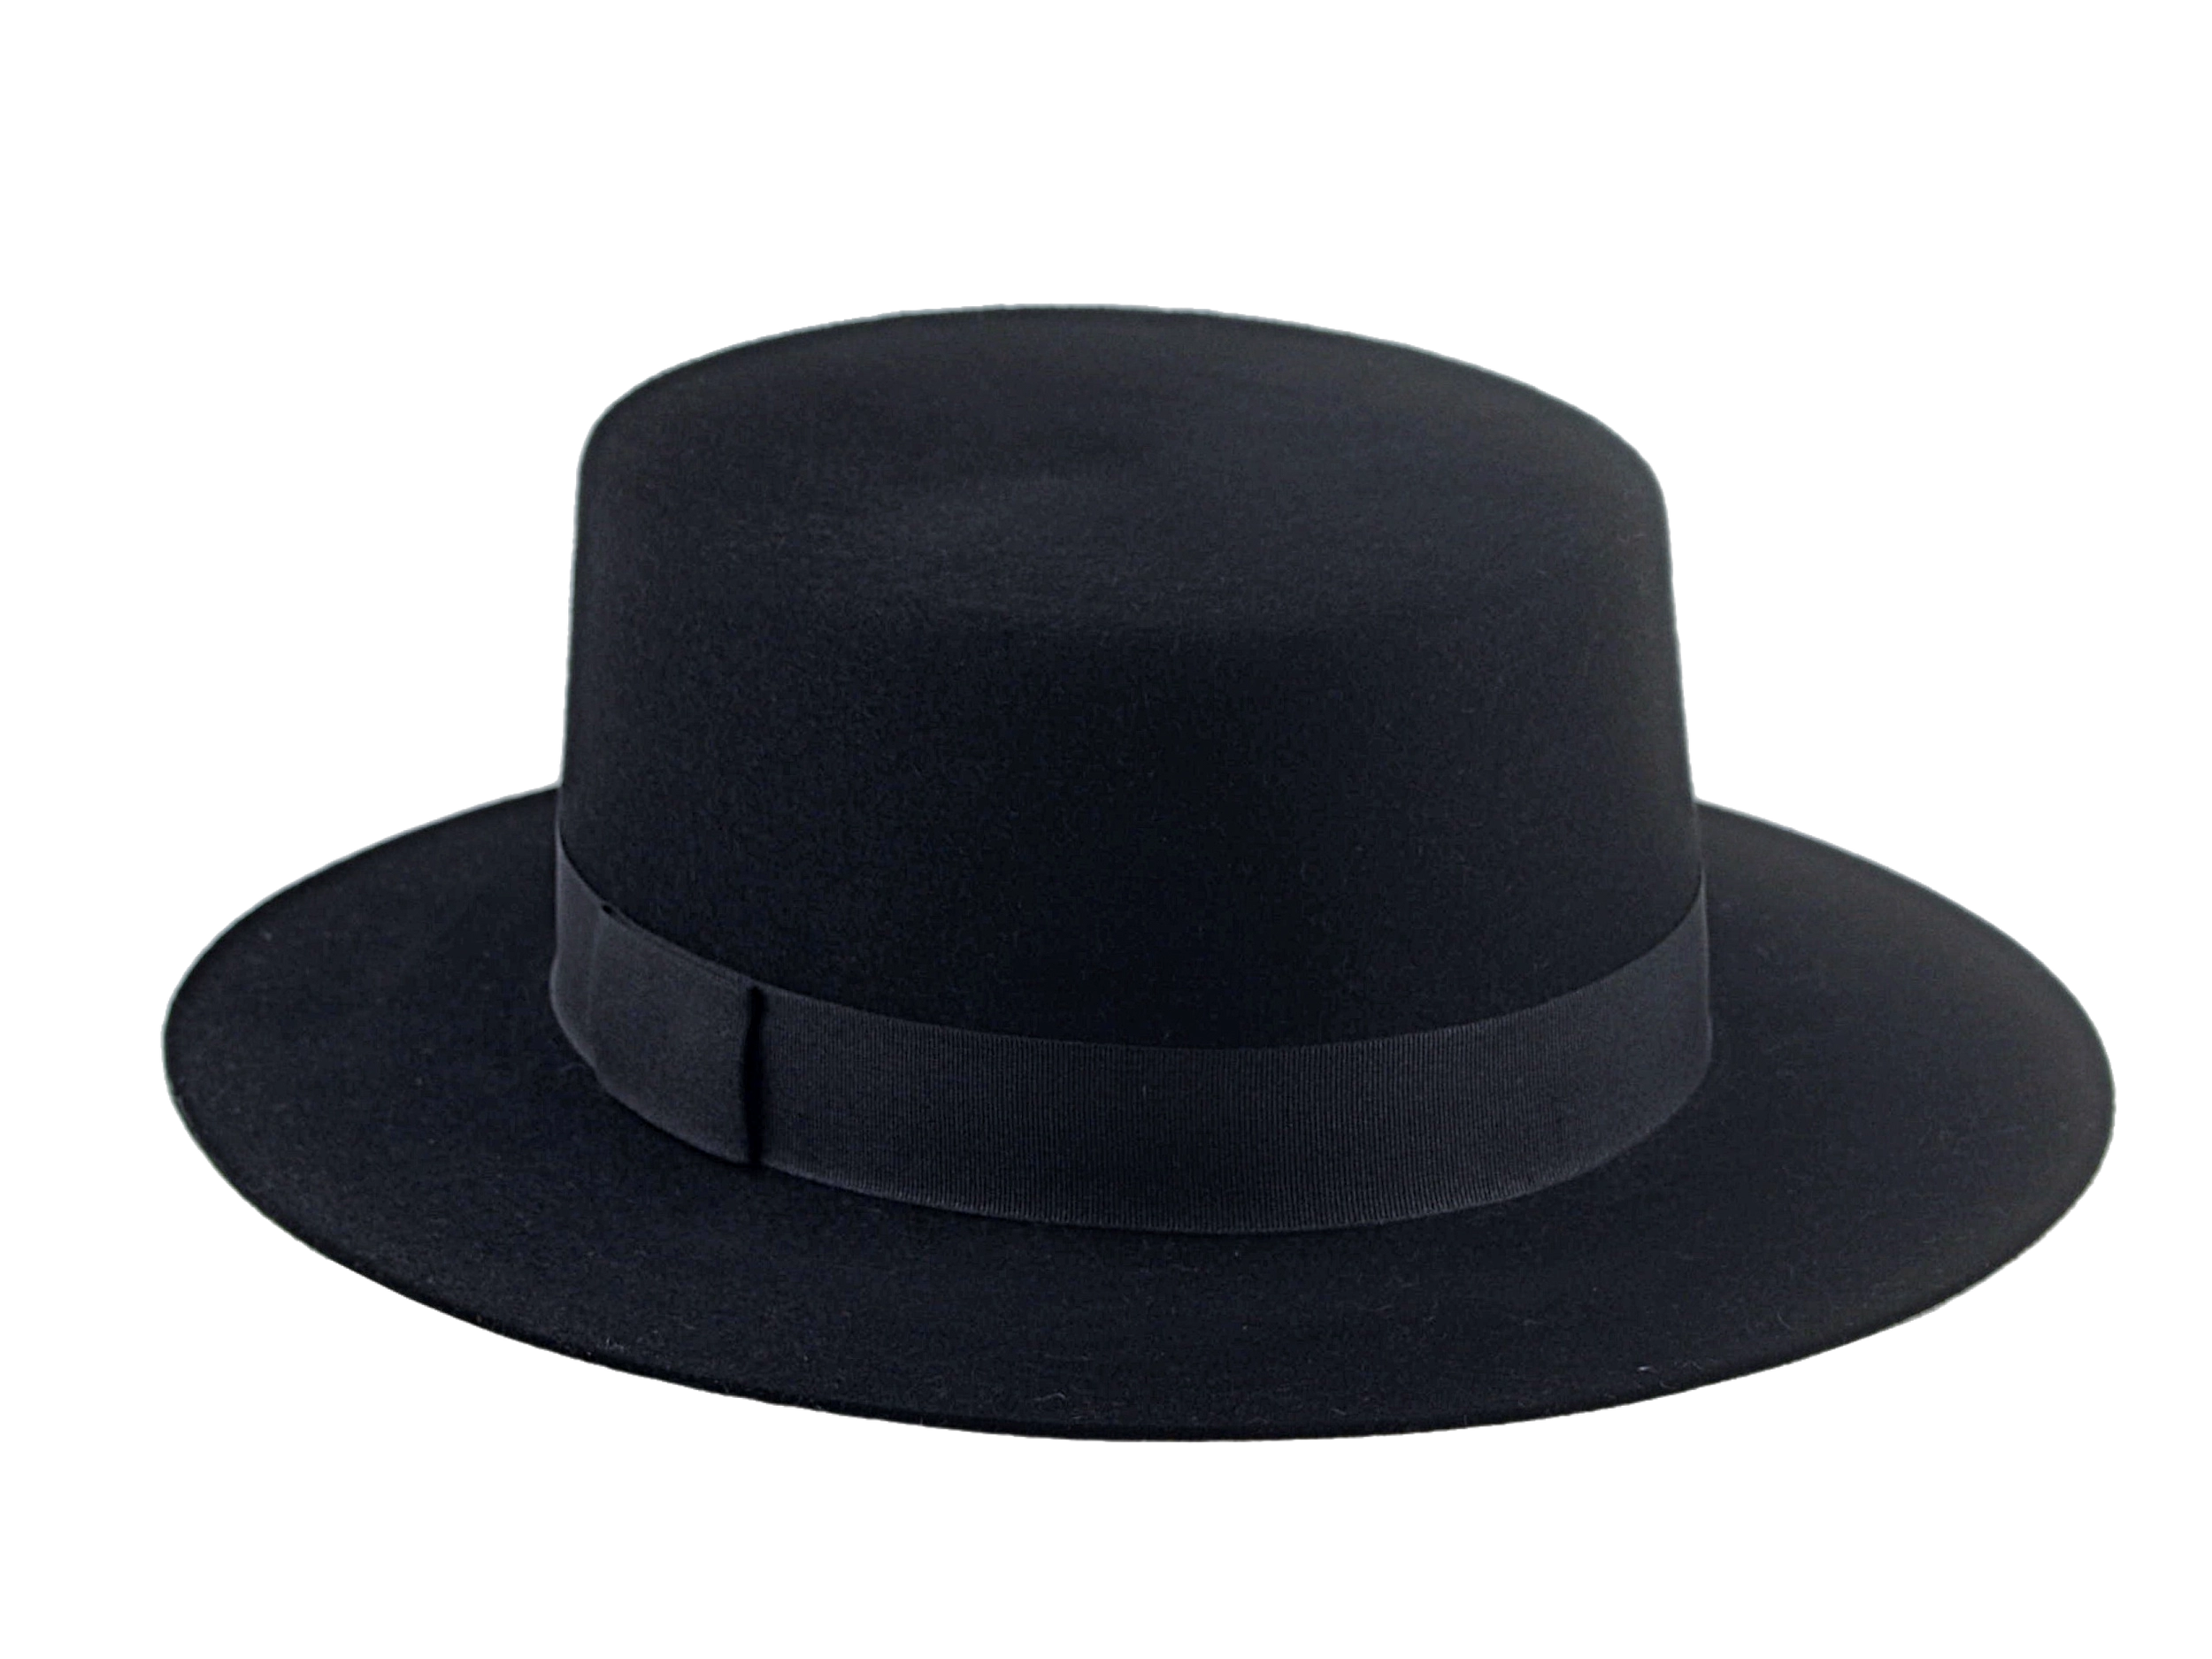 The Drover: Angle view emphasizing the unique flat crown design, standing 3 3/4" high | Agnoulita Hats